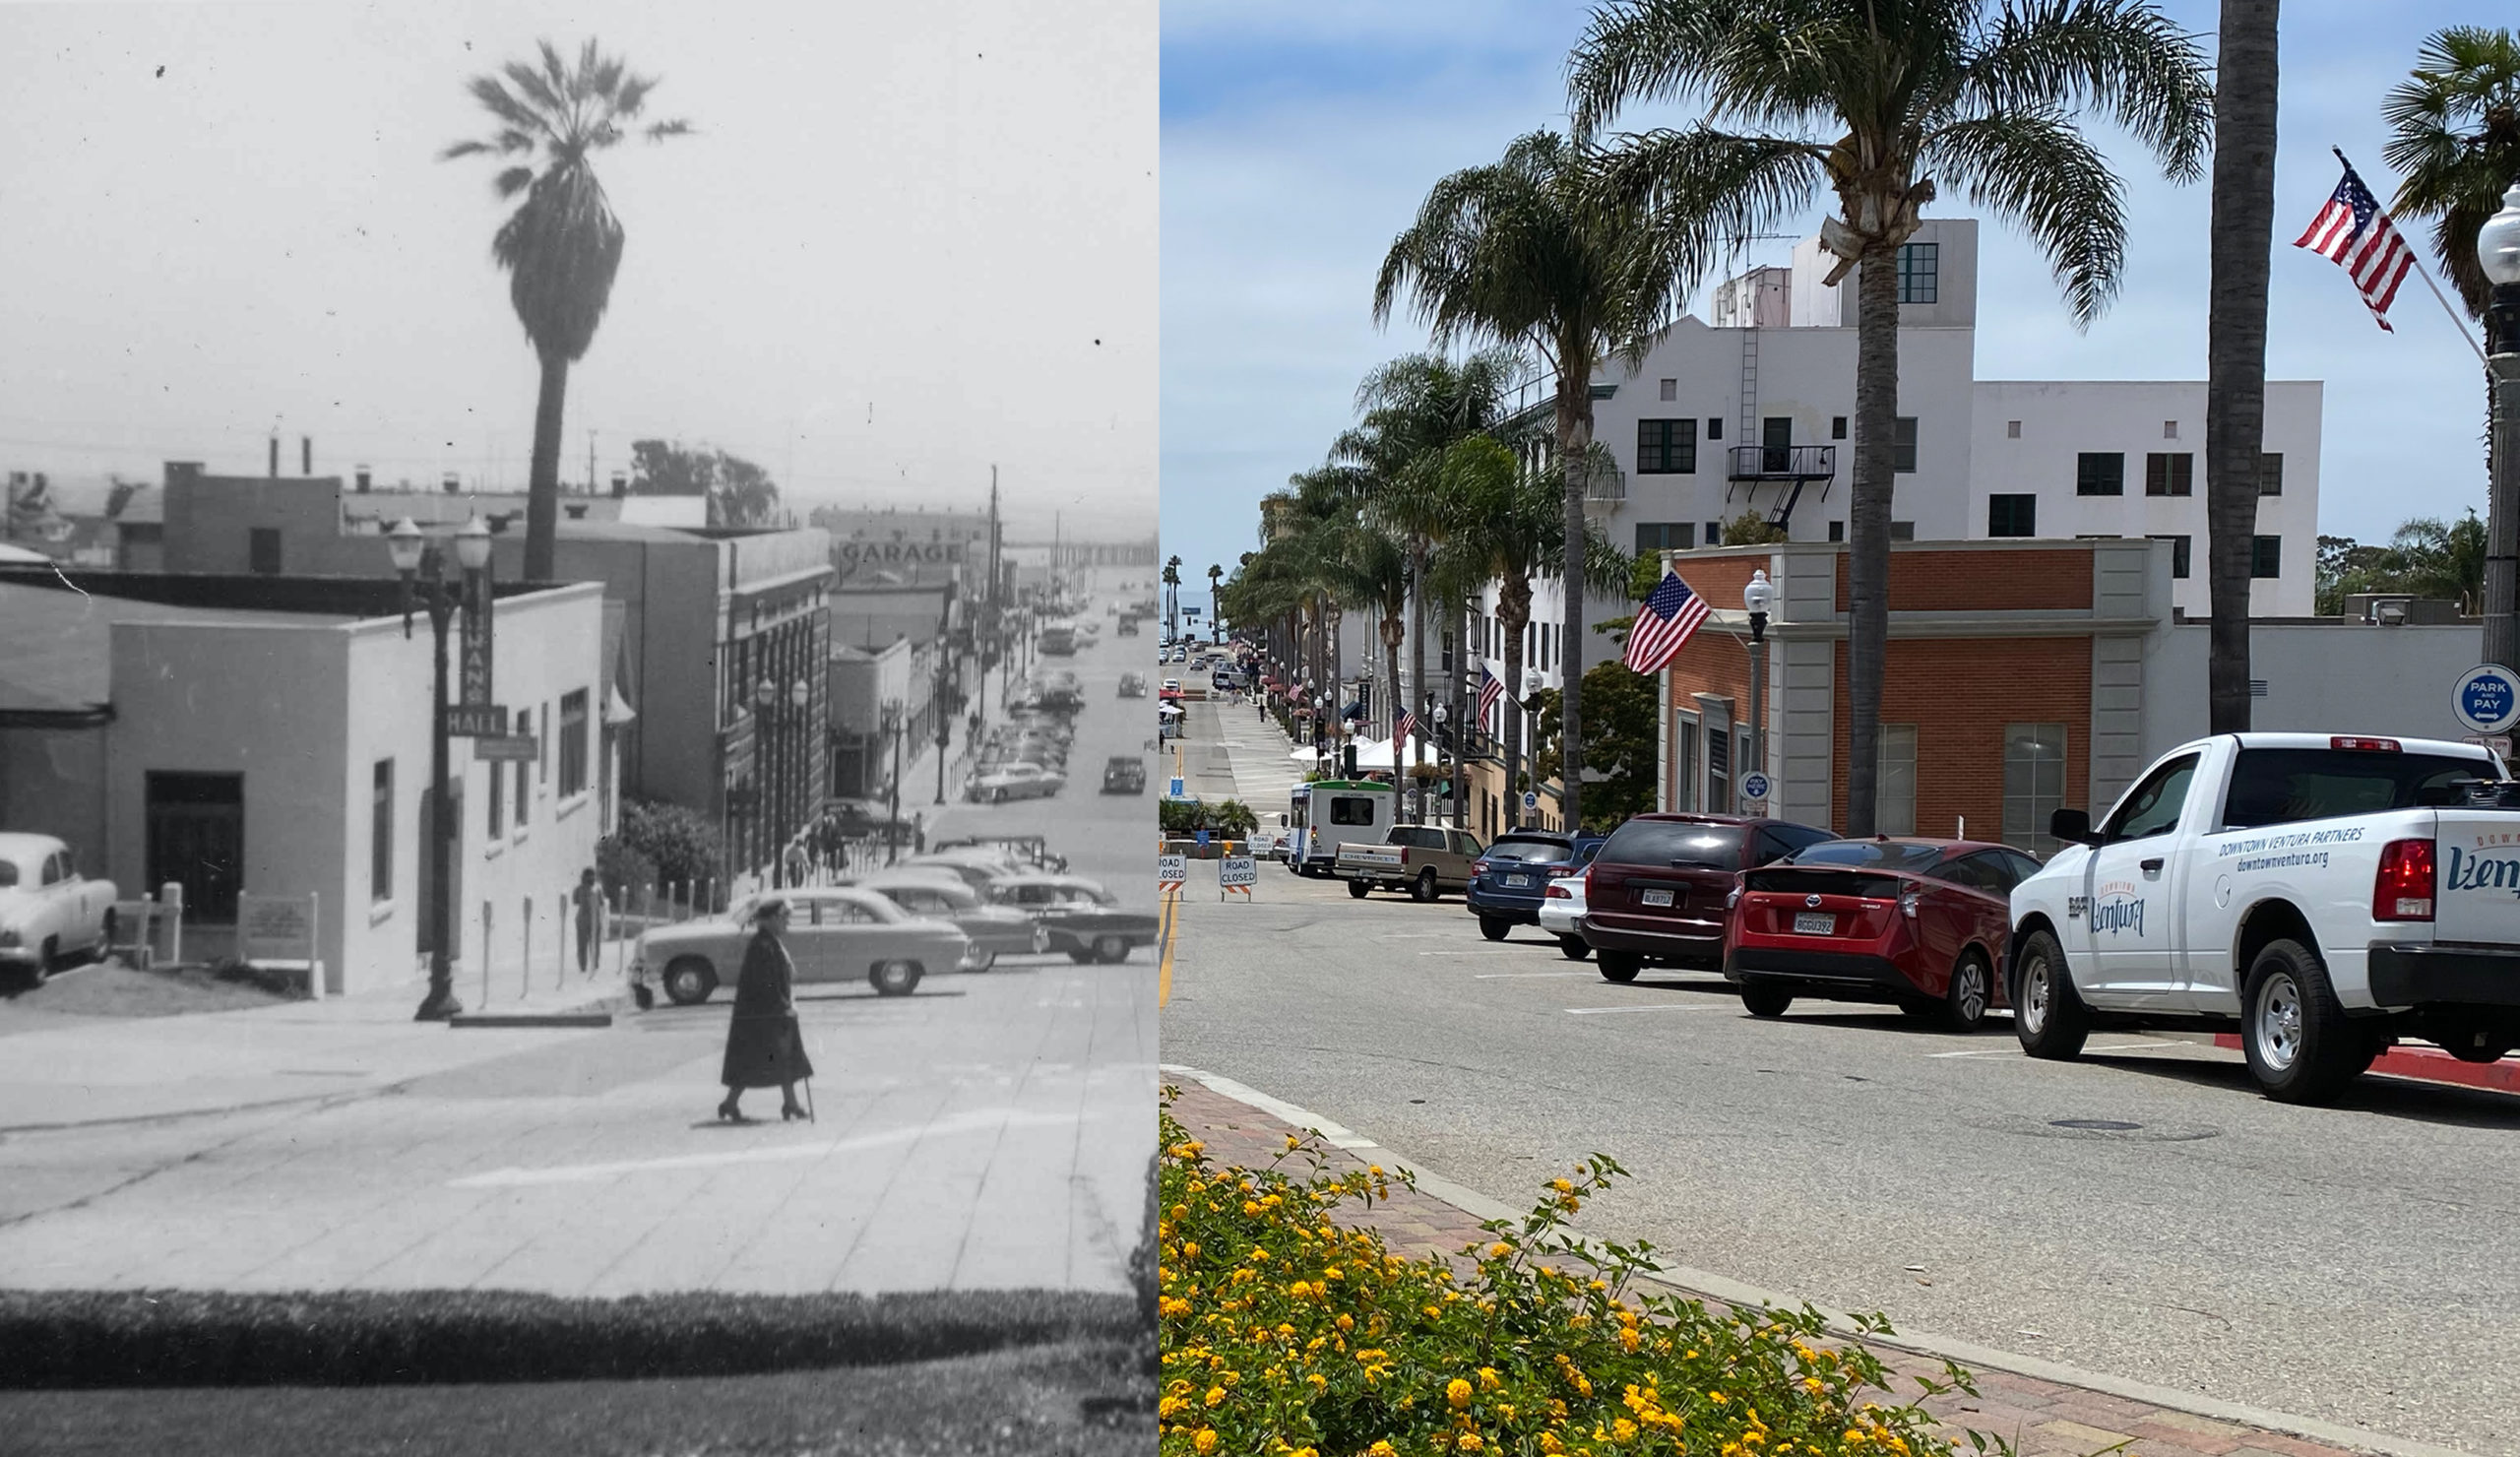 Ventura: A Fun Glimpse of the Not-Entirely-Distant Past